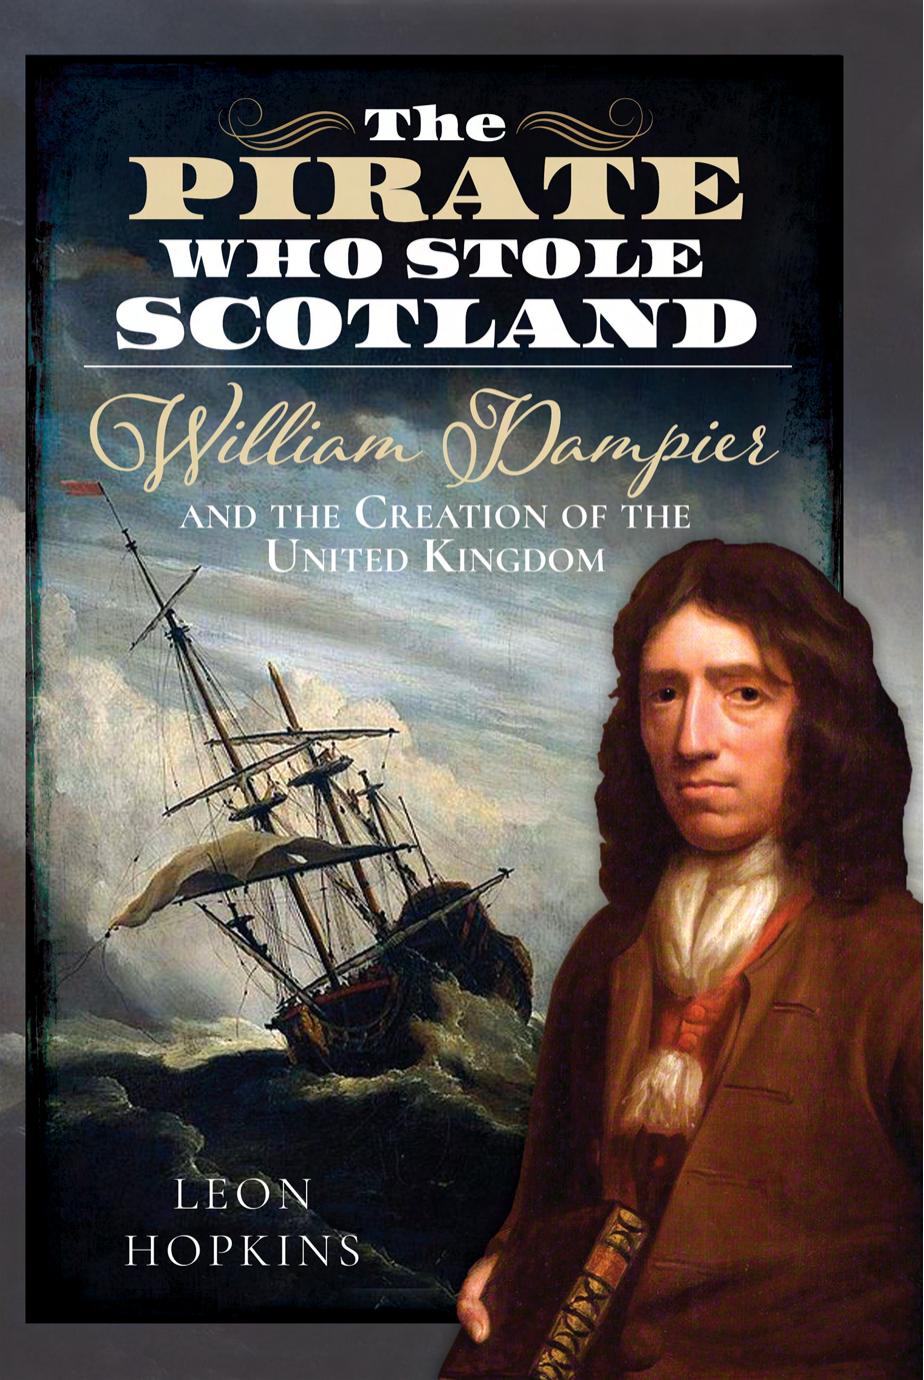 The Pirate who Stole Scotland by Leon Hopkins